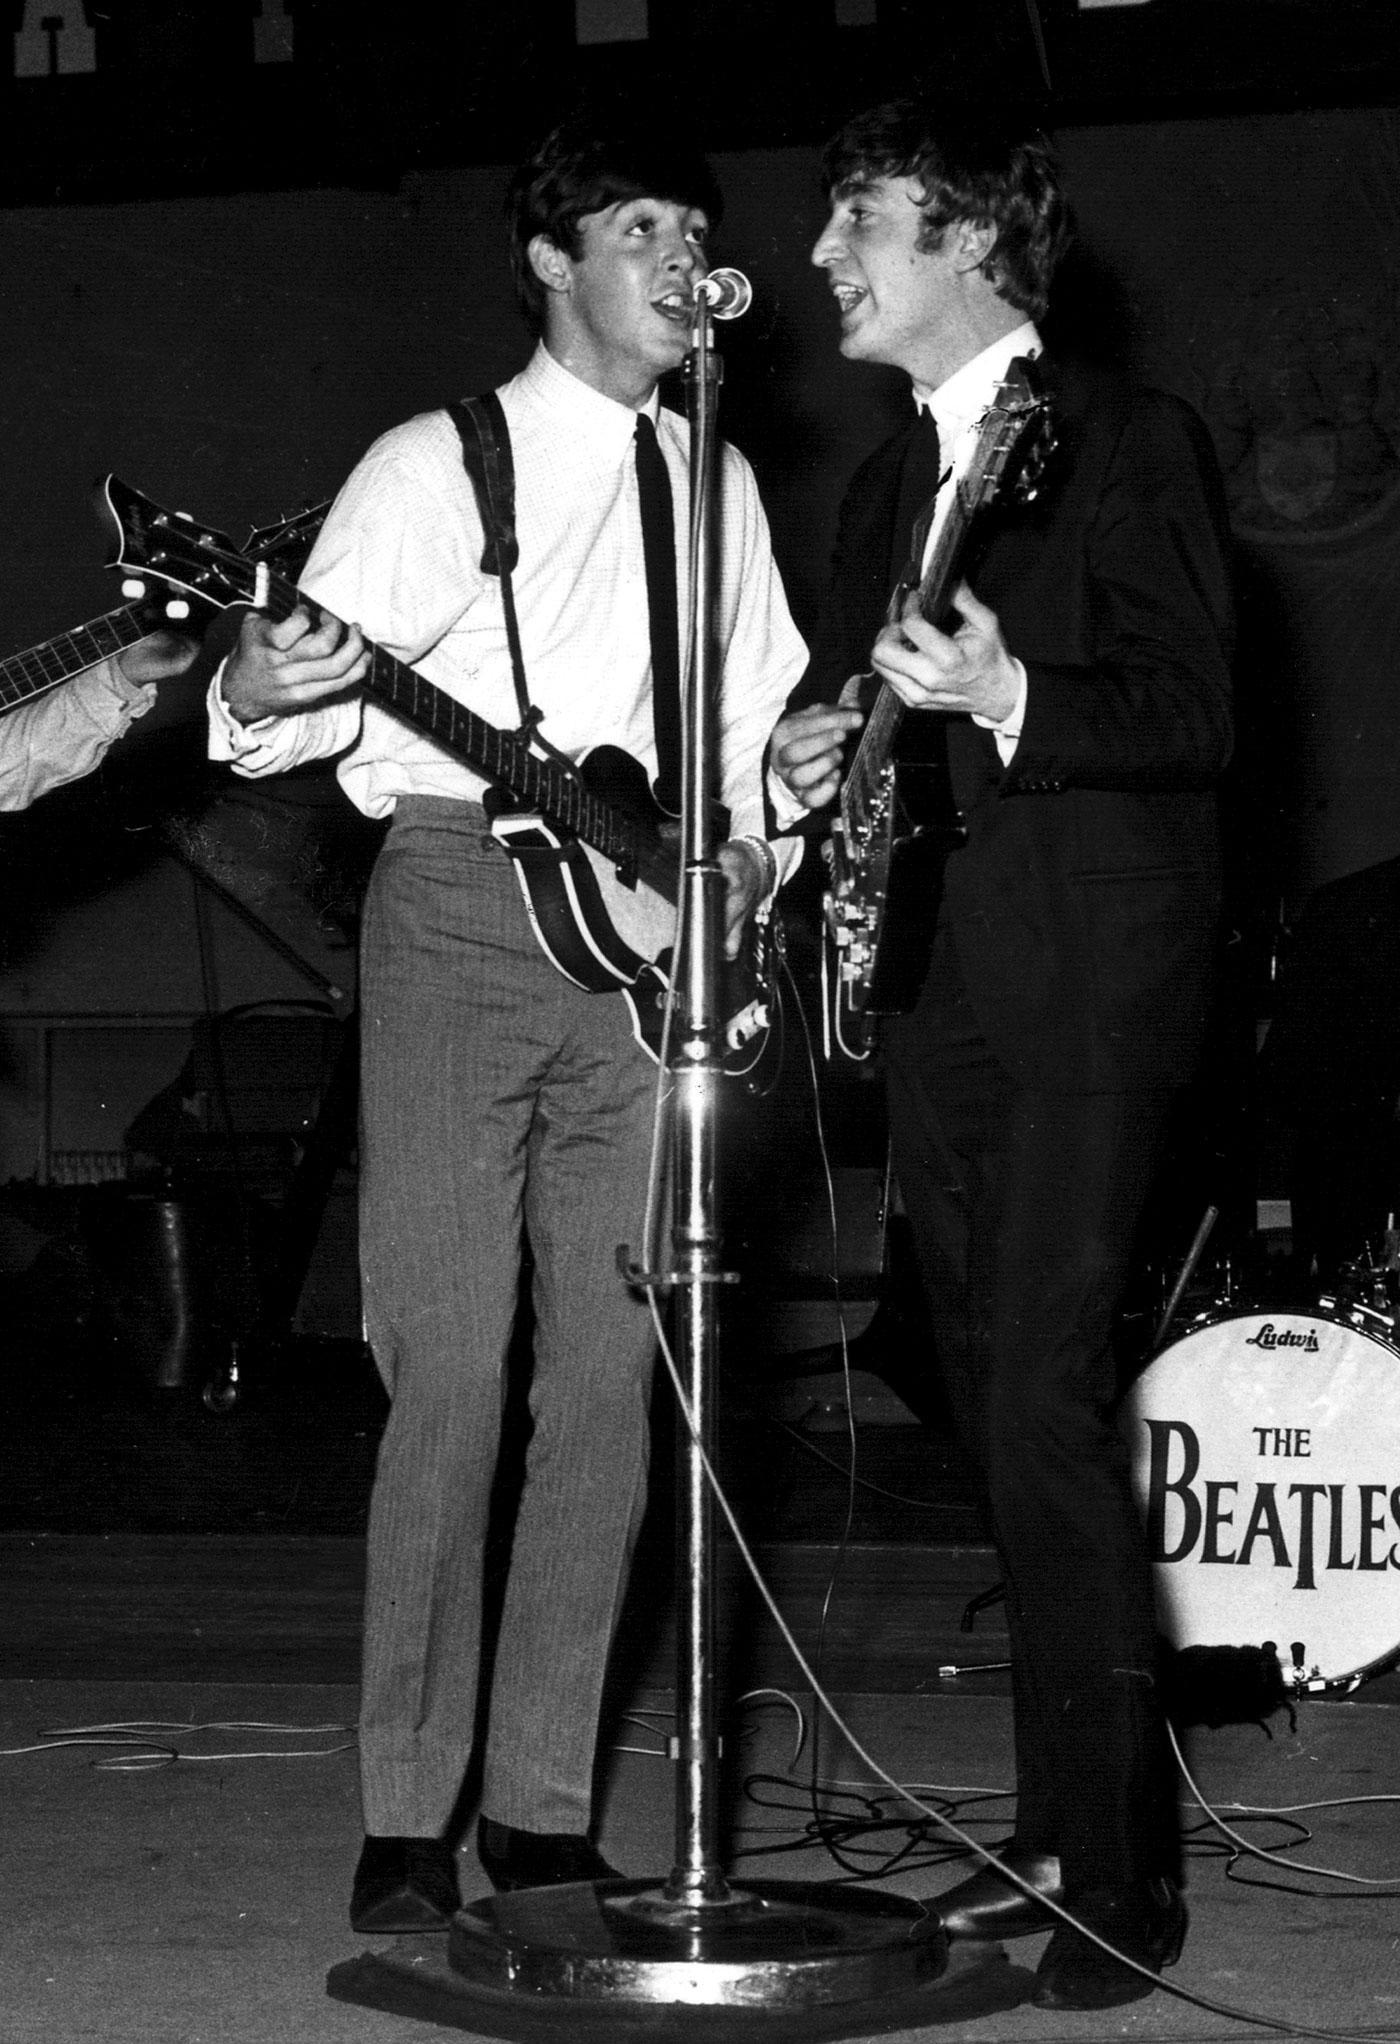 Paul McCartney and John Lennon performing in 1963, the year of The Beatles’ first number one single From Me To You.